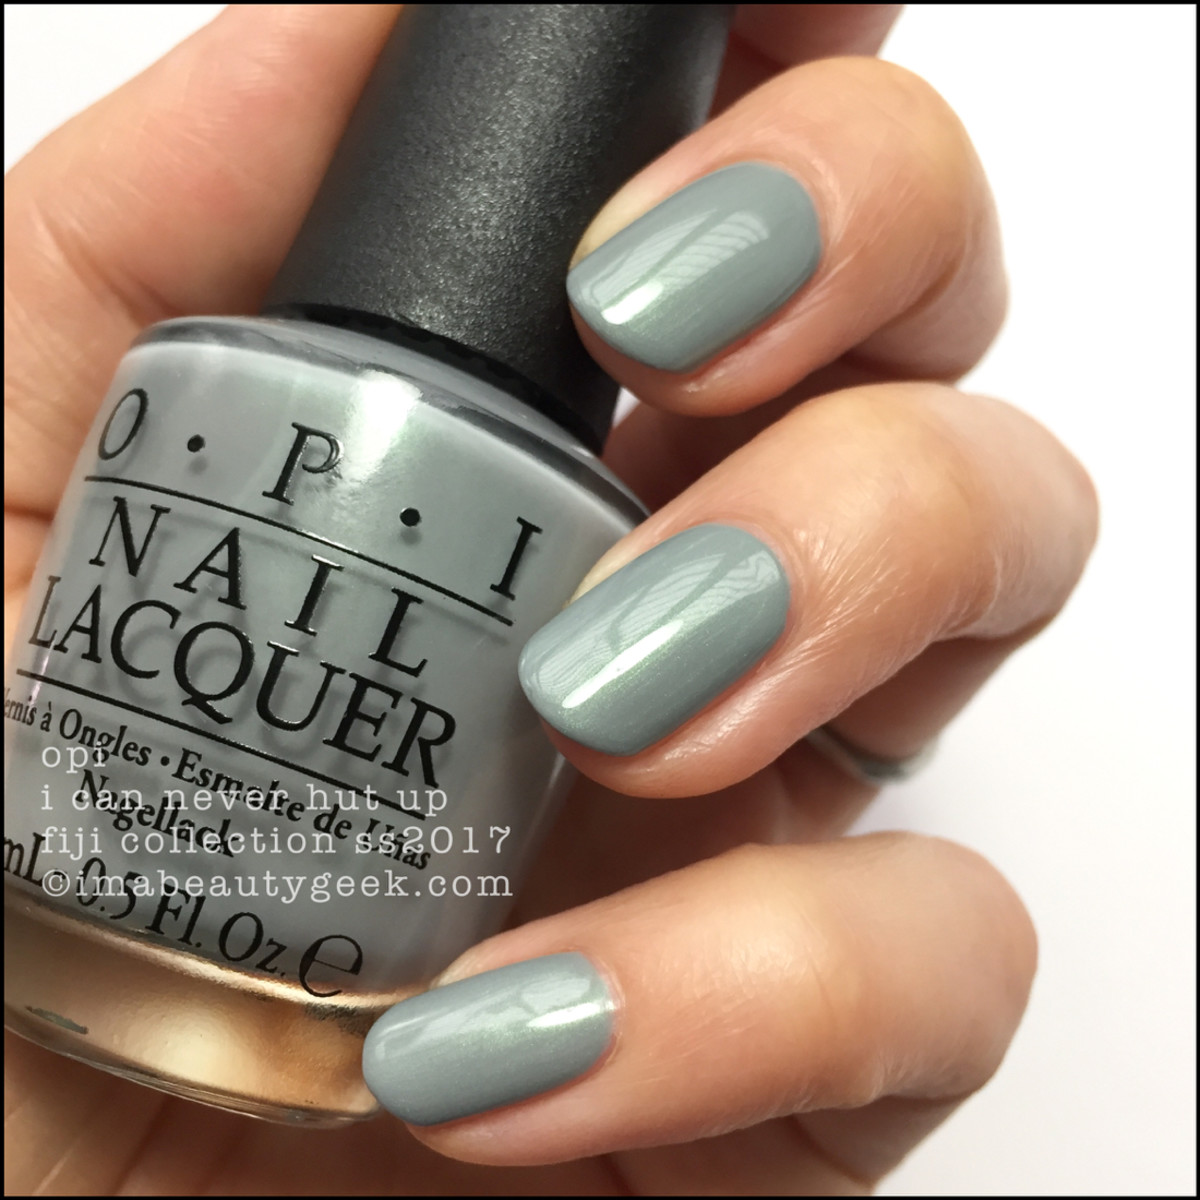 OPI I Can Never Hut Up_OPI Fiji Collection Swatches Review 2017